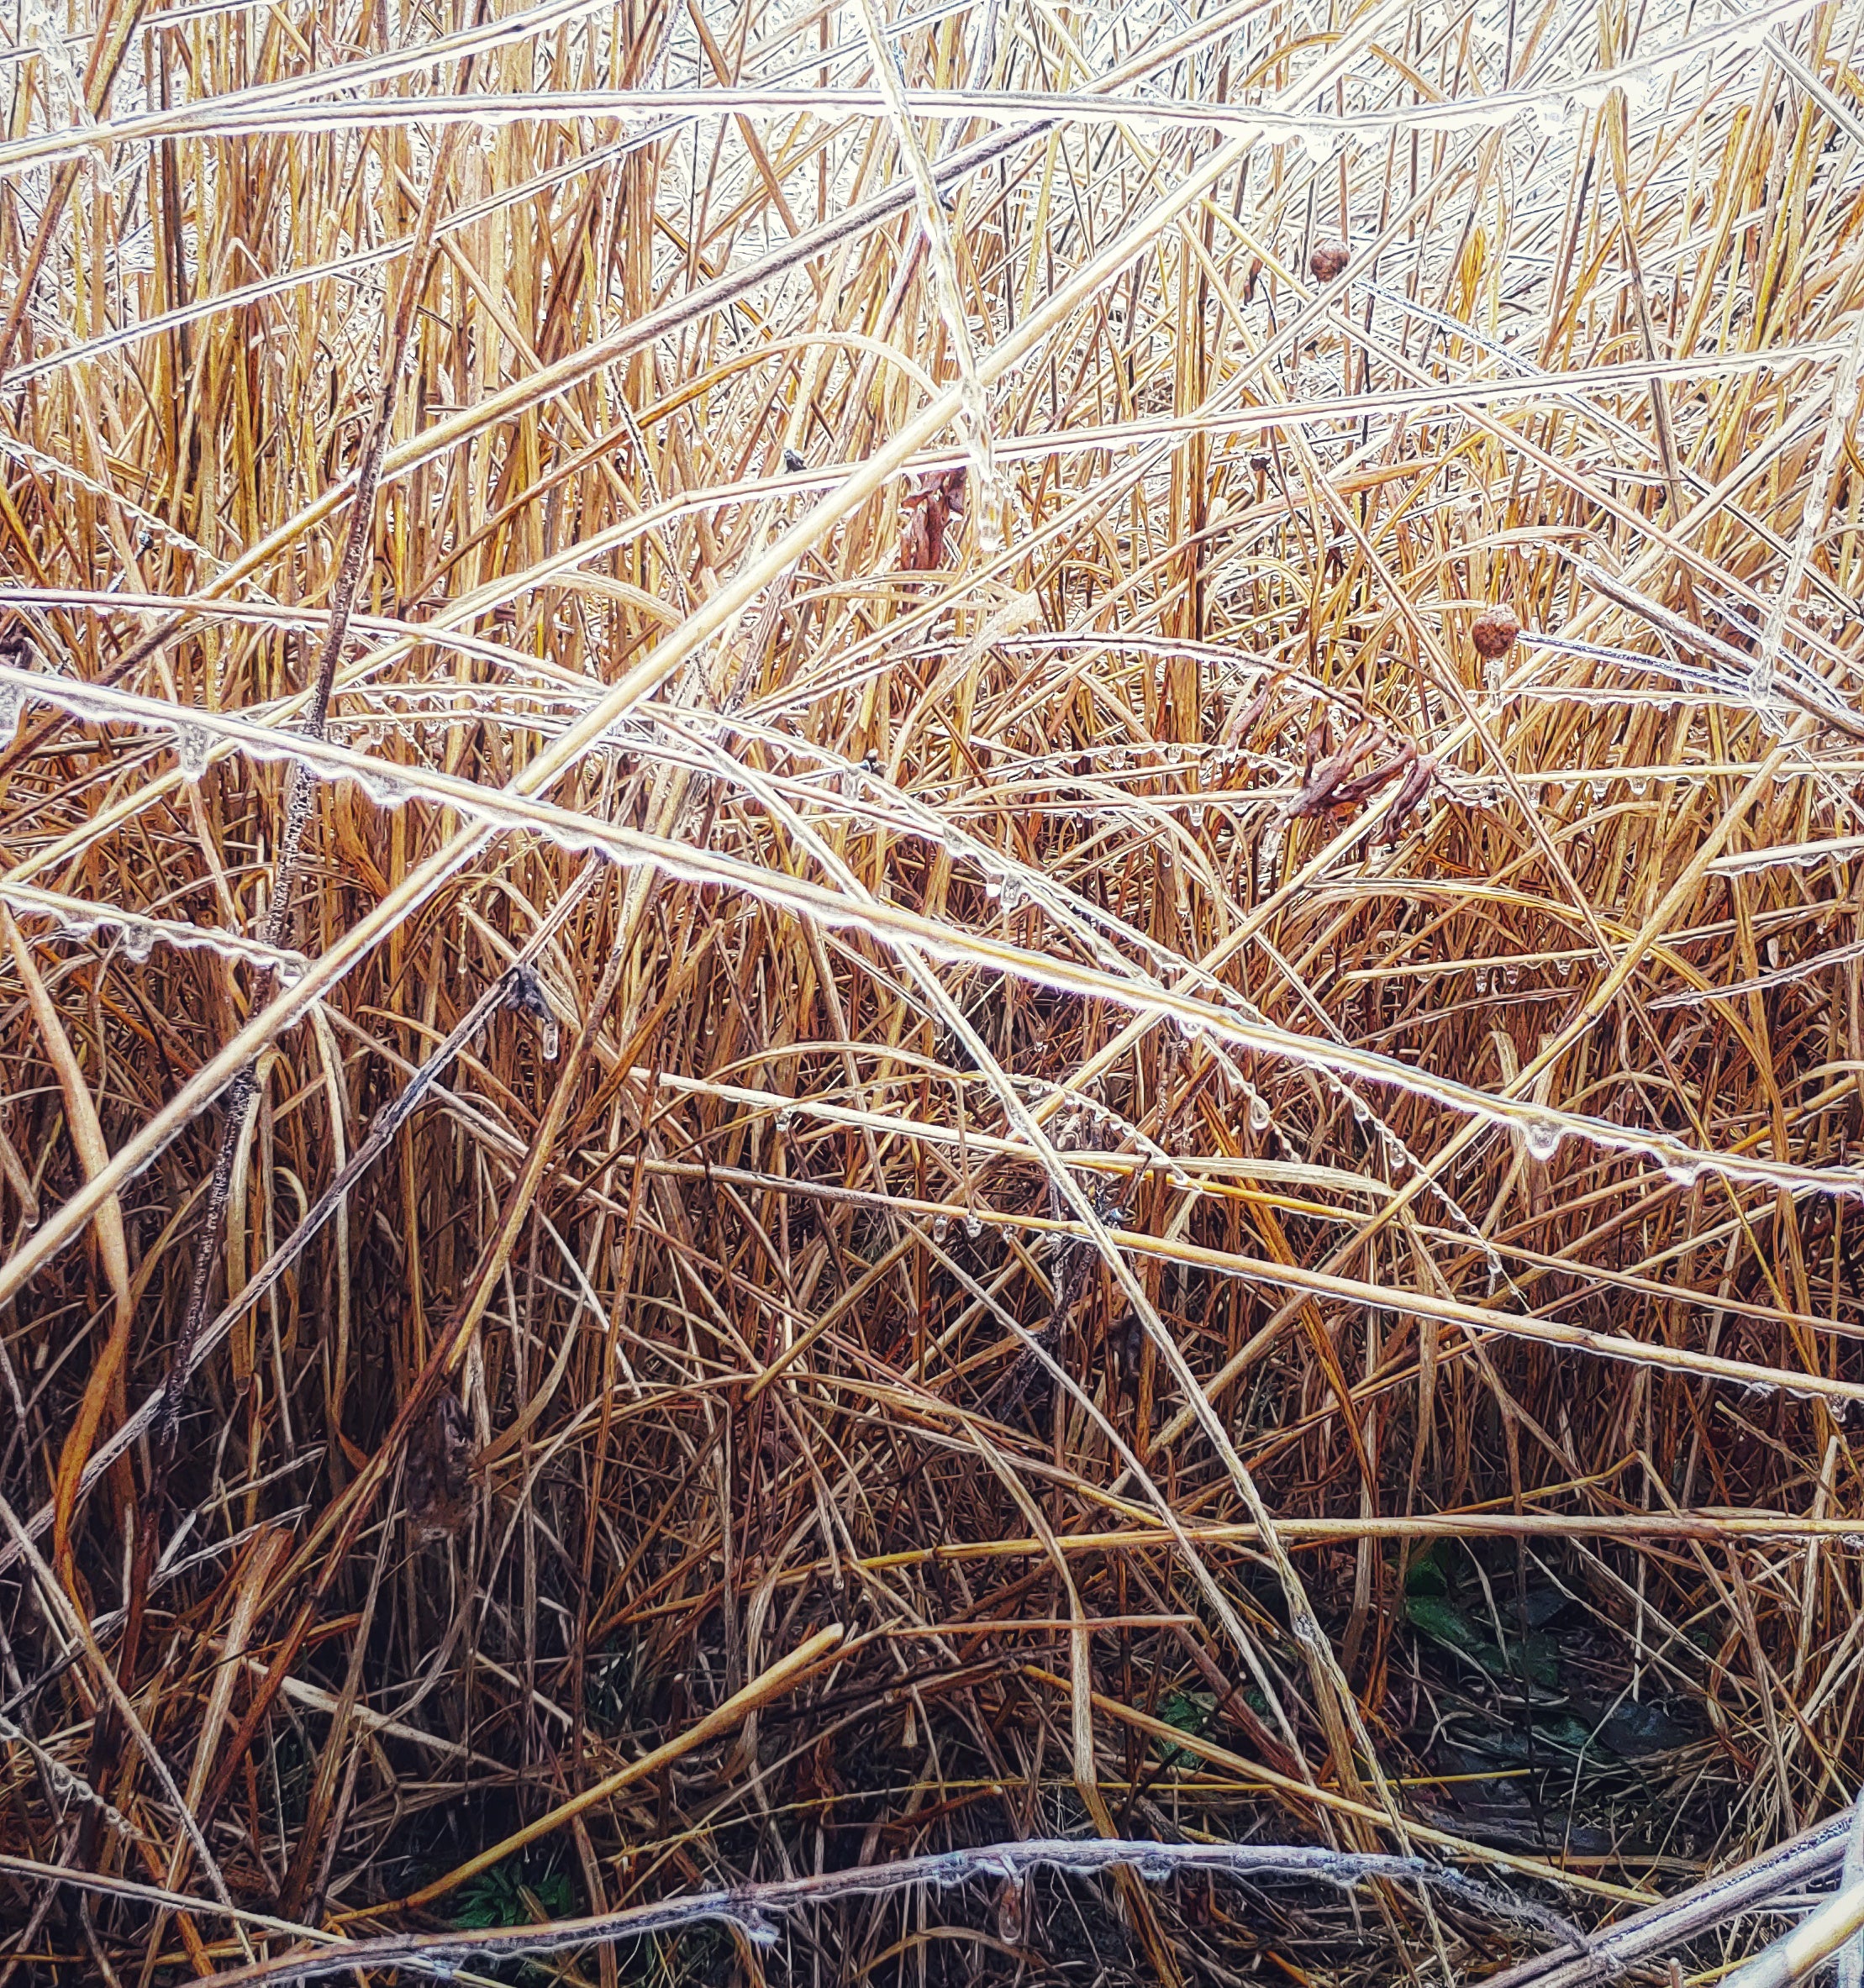 This stand of warm-season grasses maintained its structure even after an ice storm. The bare ground visible underneath the grass canopy allows animals and birds to move easily throughout.